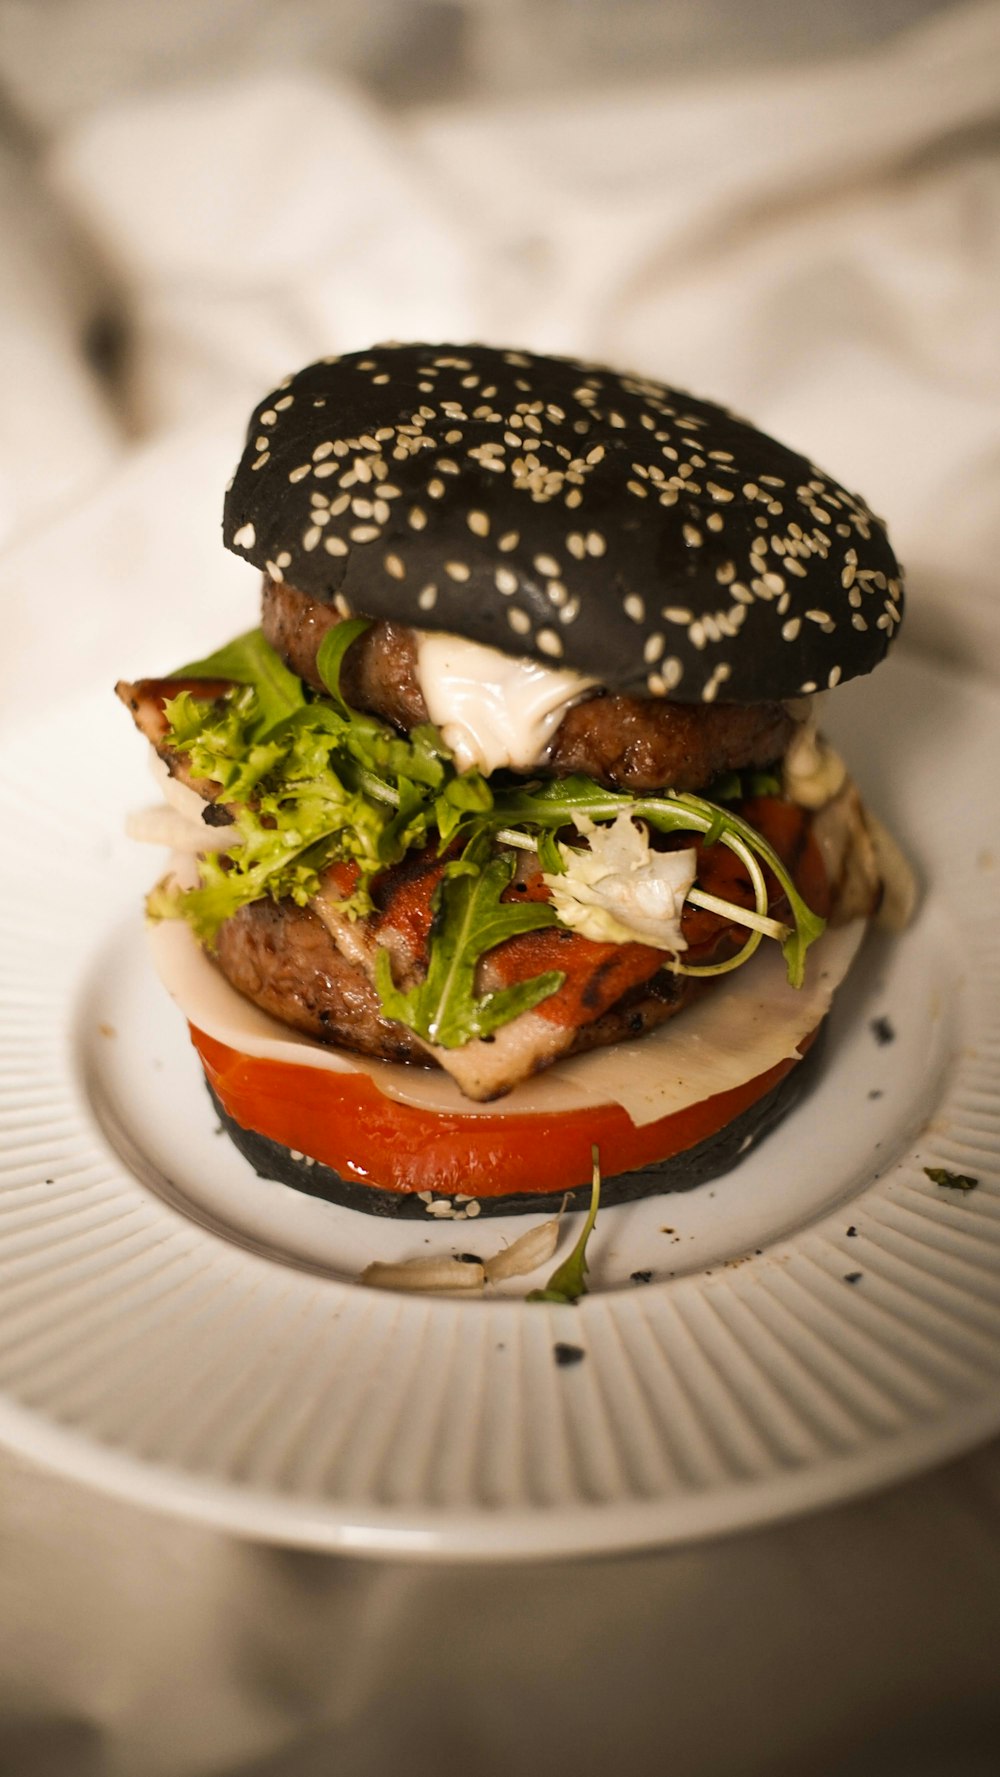 a hamburger with lettuce and tomato on a plate